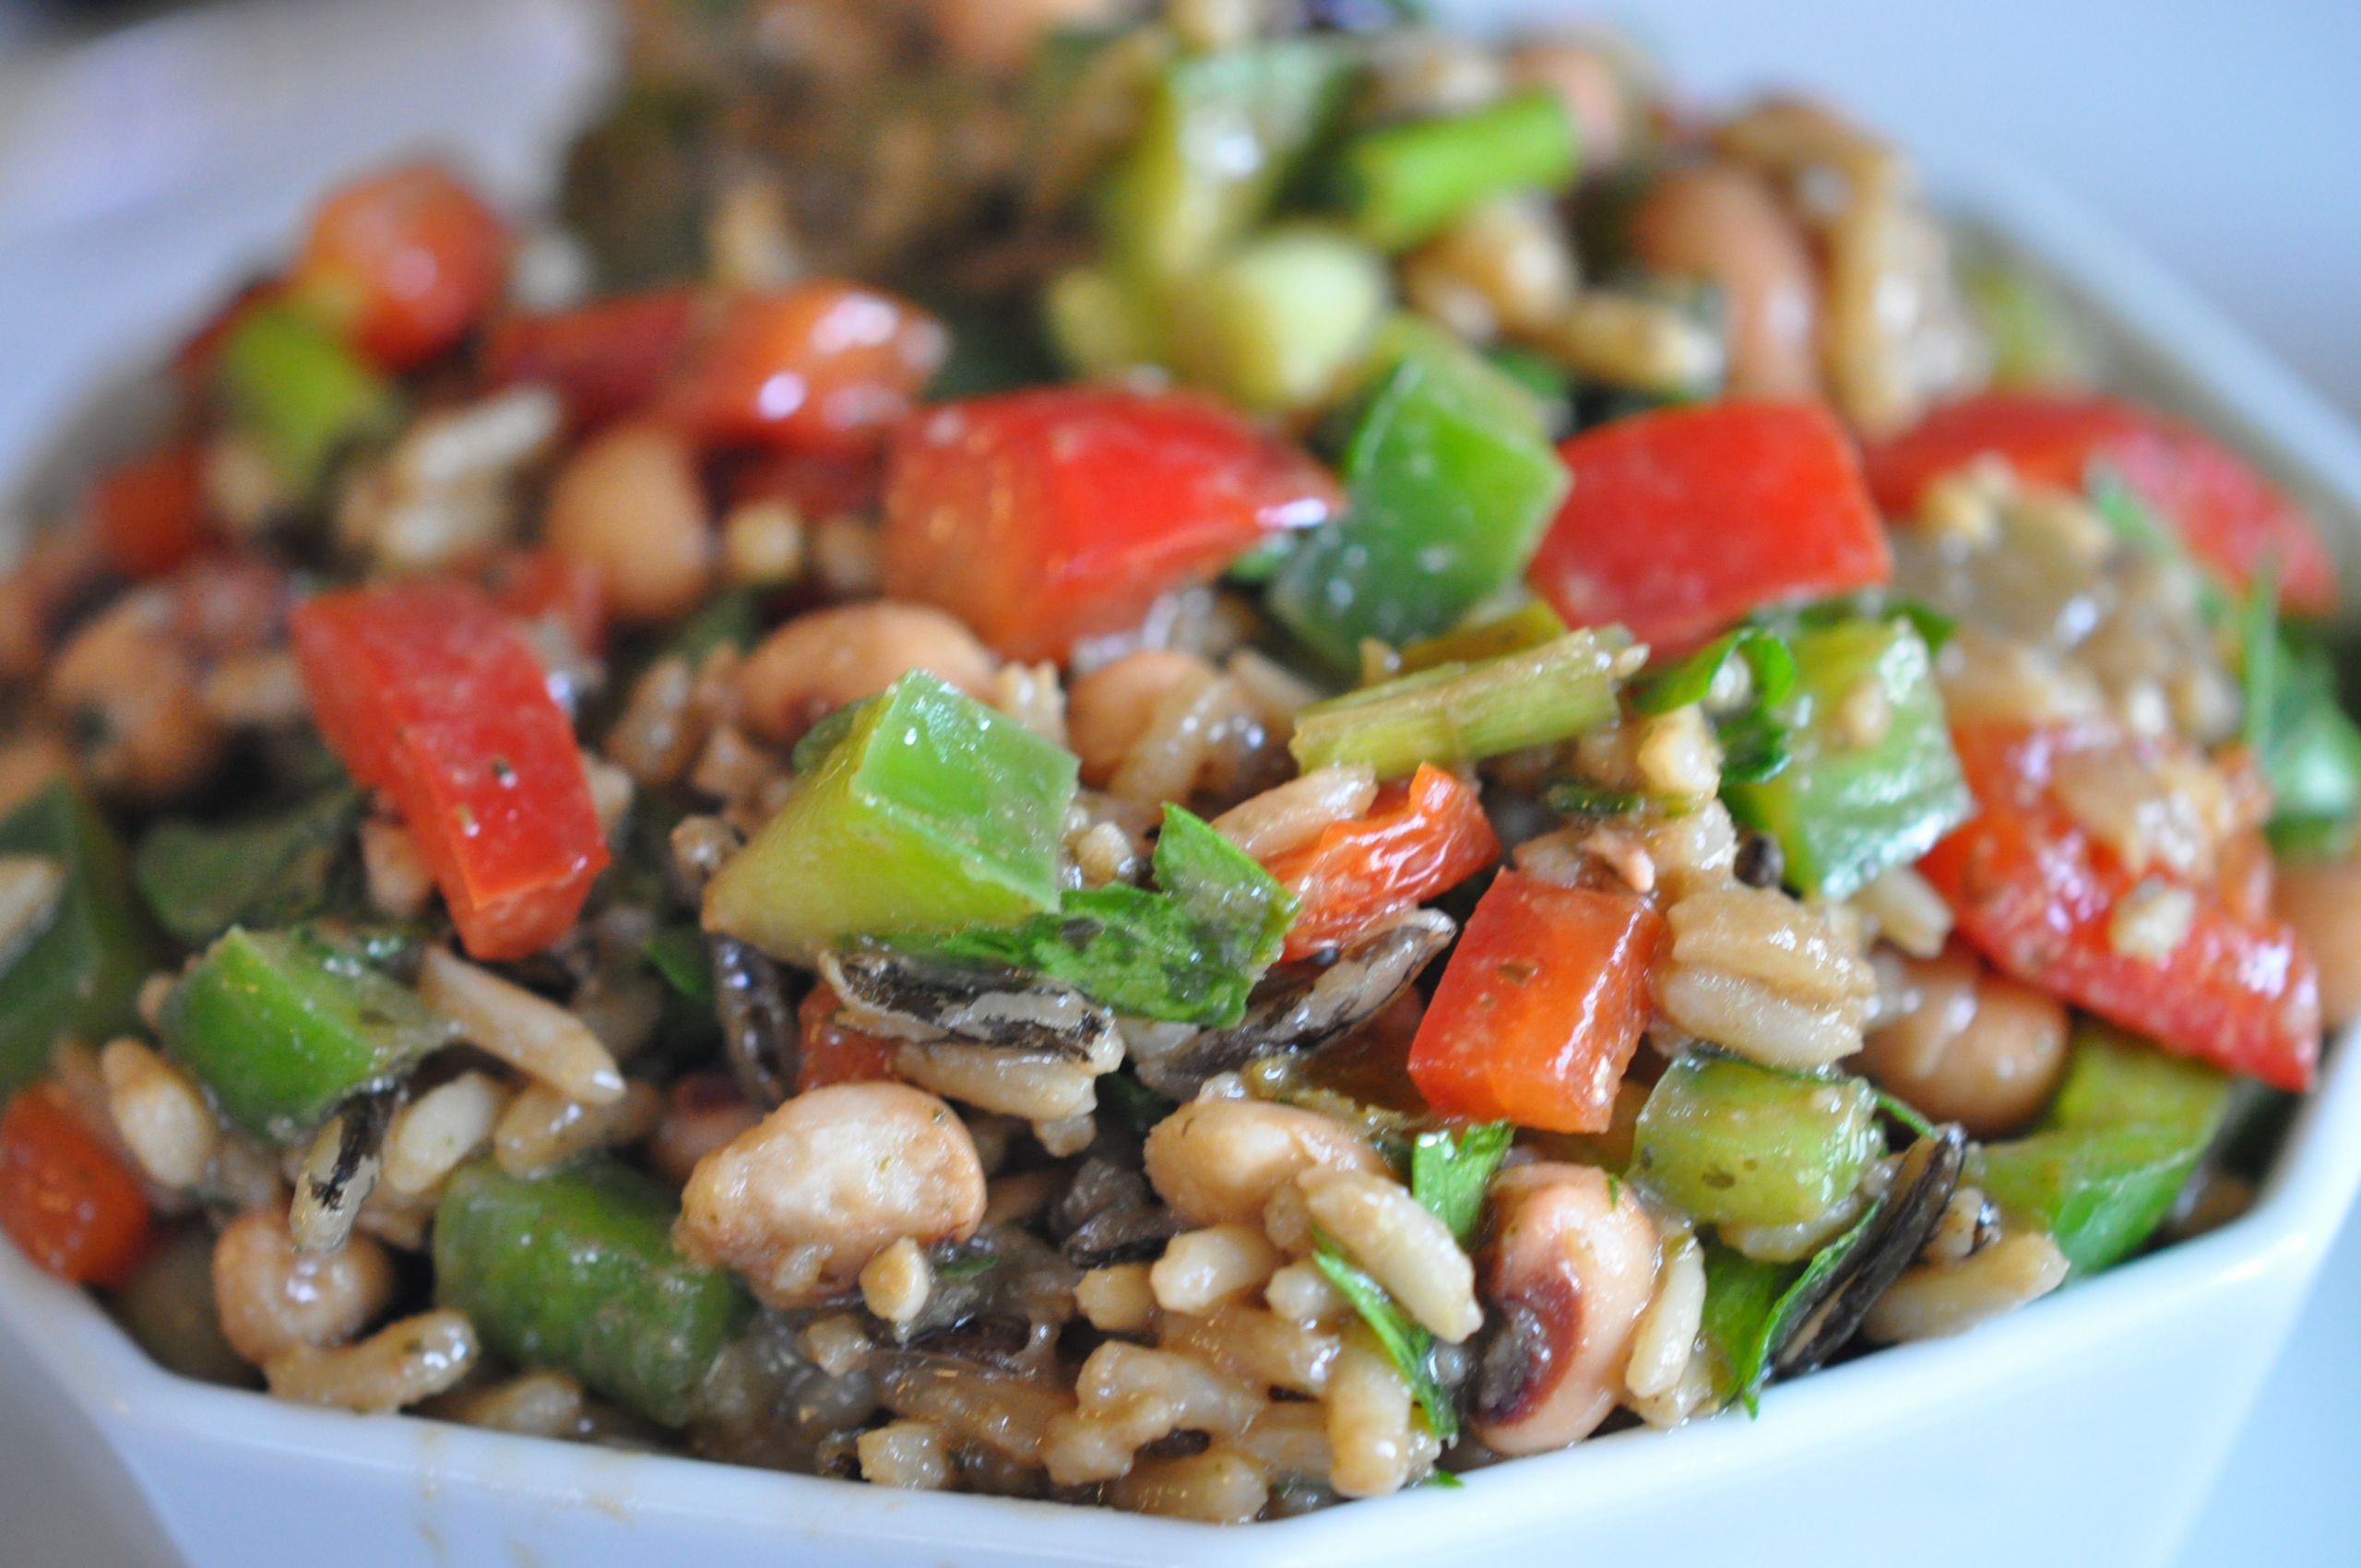 New Year Dinner Traditions
 New Year Dinner Traditions with Black Eyed Pea Salad Recipe